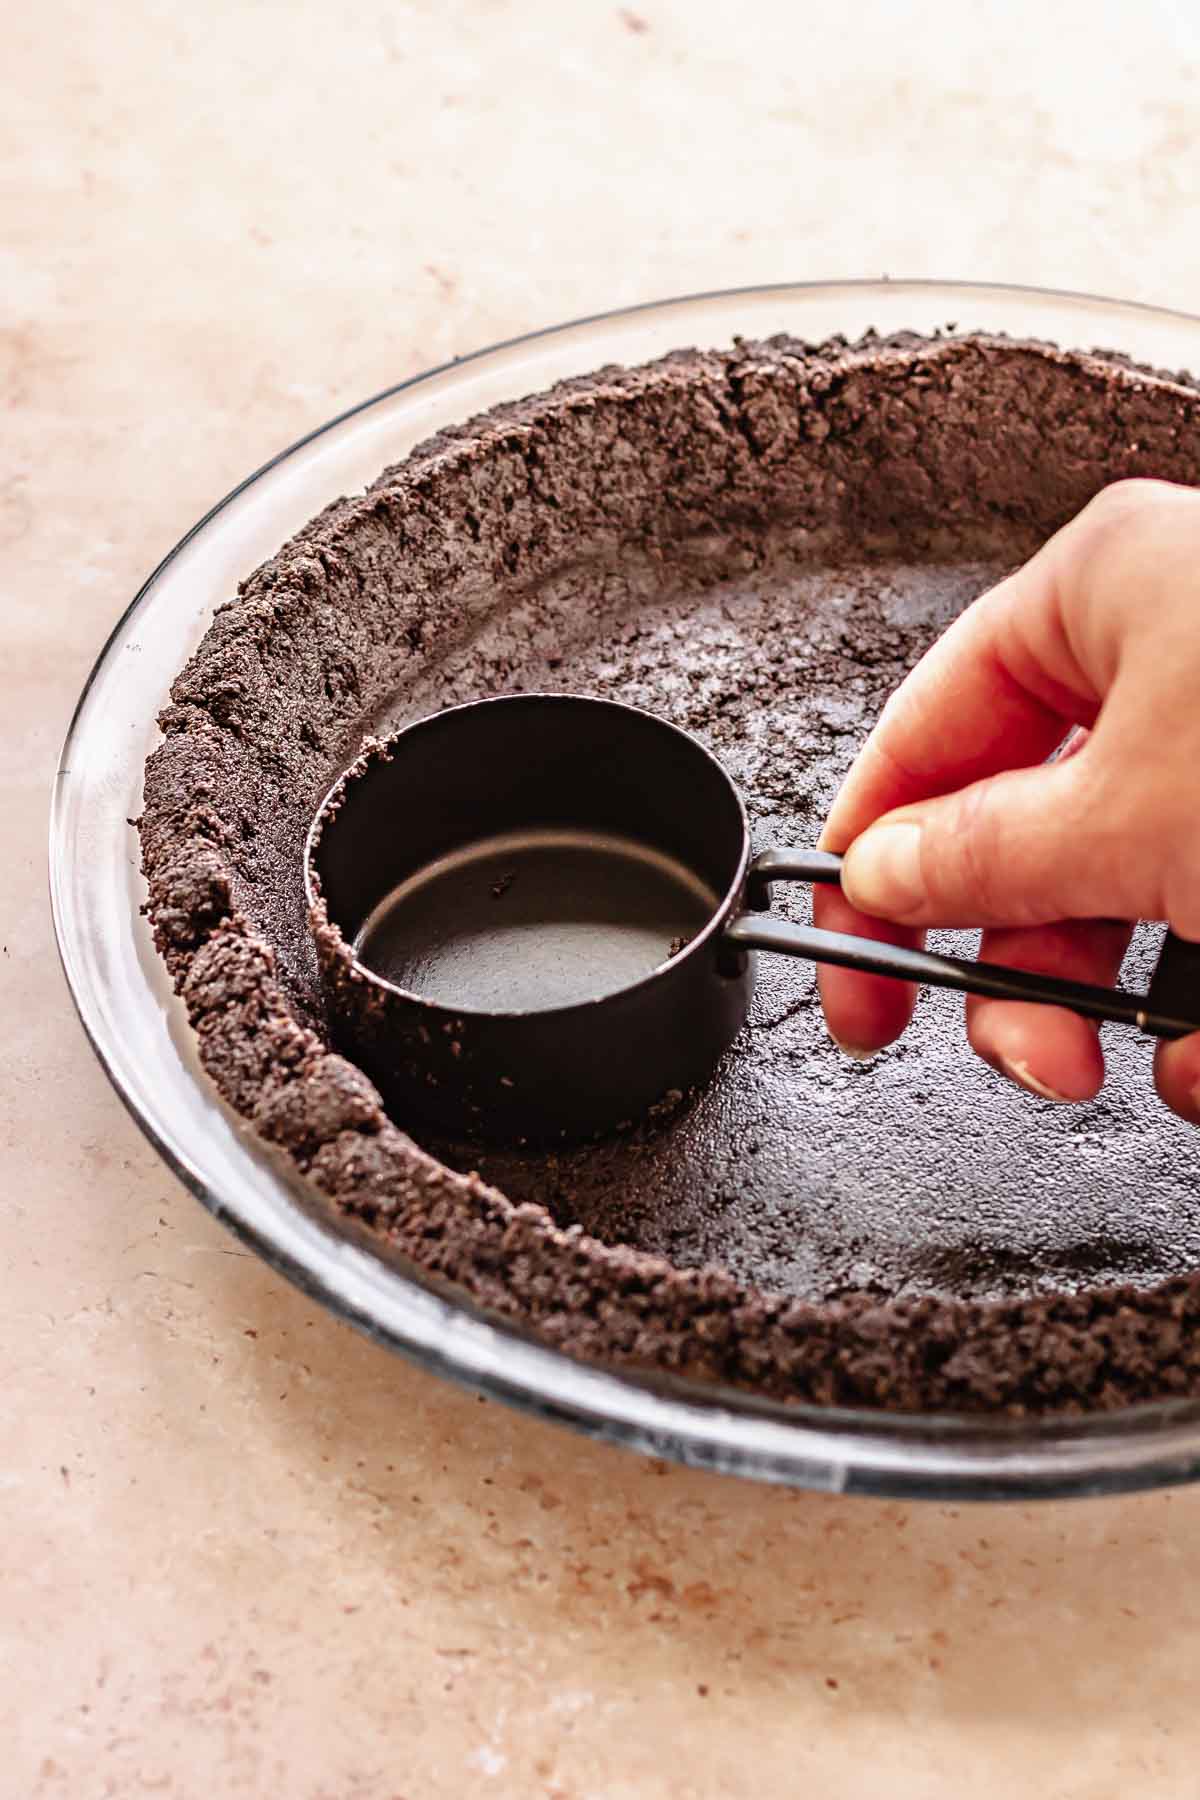 A hand uses a measuring cup to press oreo crust into a pie dish.